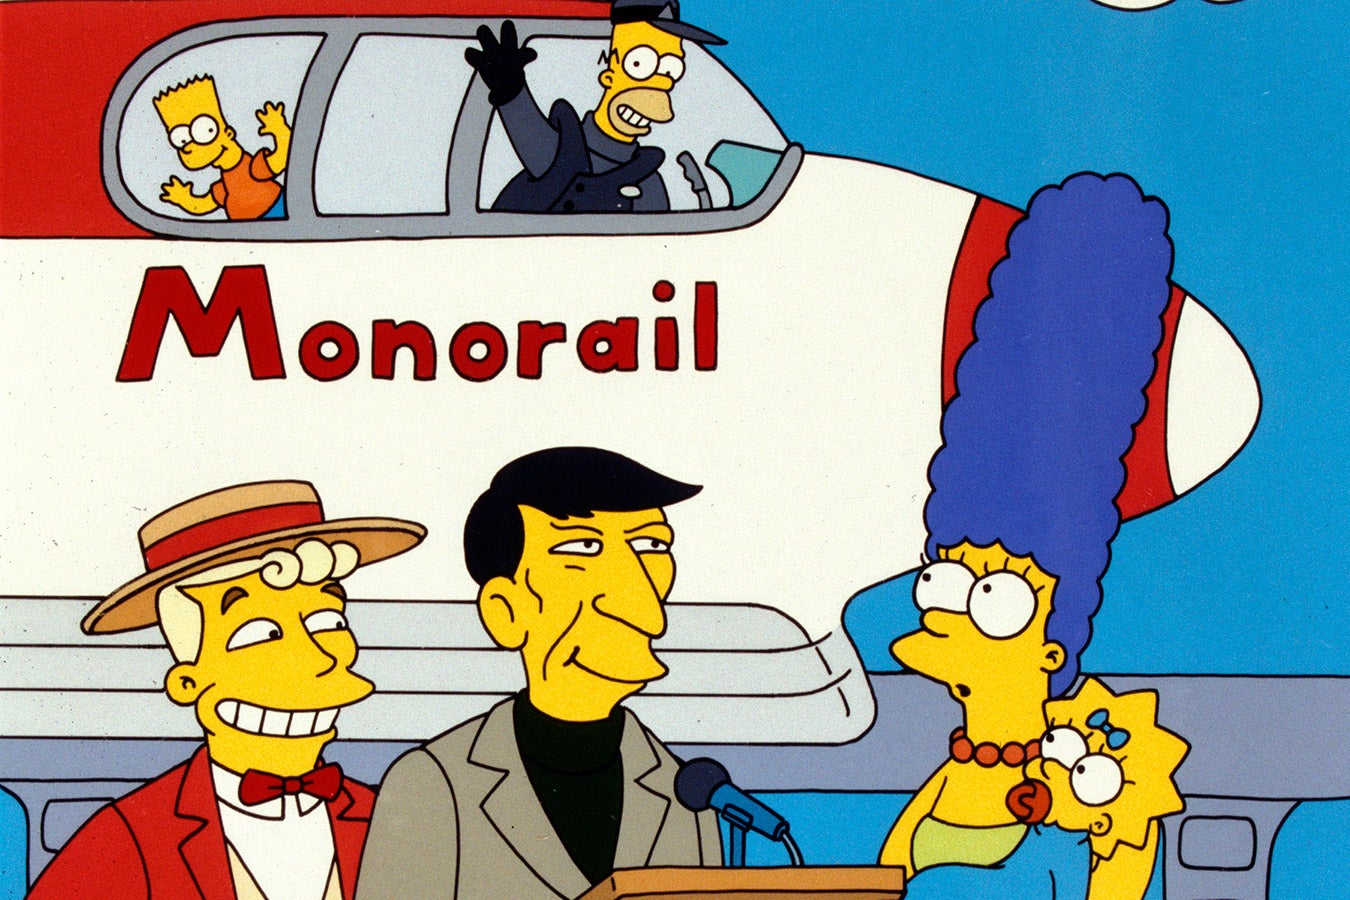 Bart and Homer wave from the monorail, while Marge, Lisa, and two men look on from the ground.